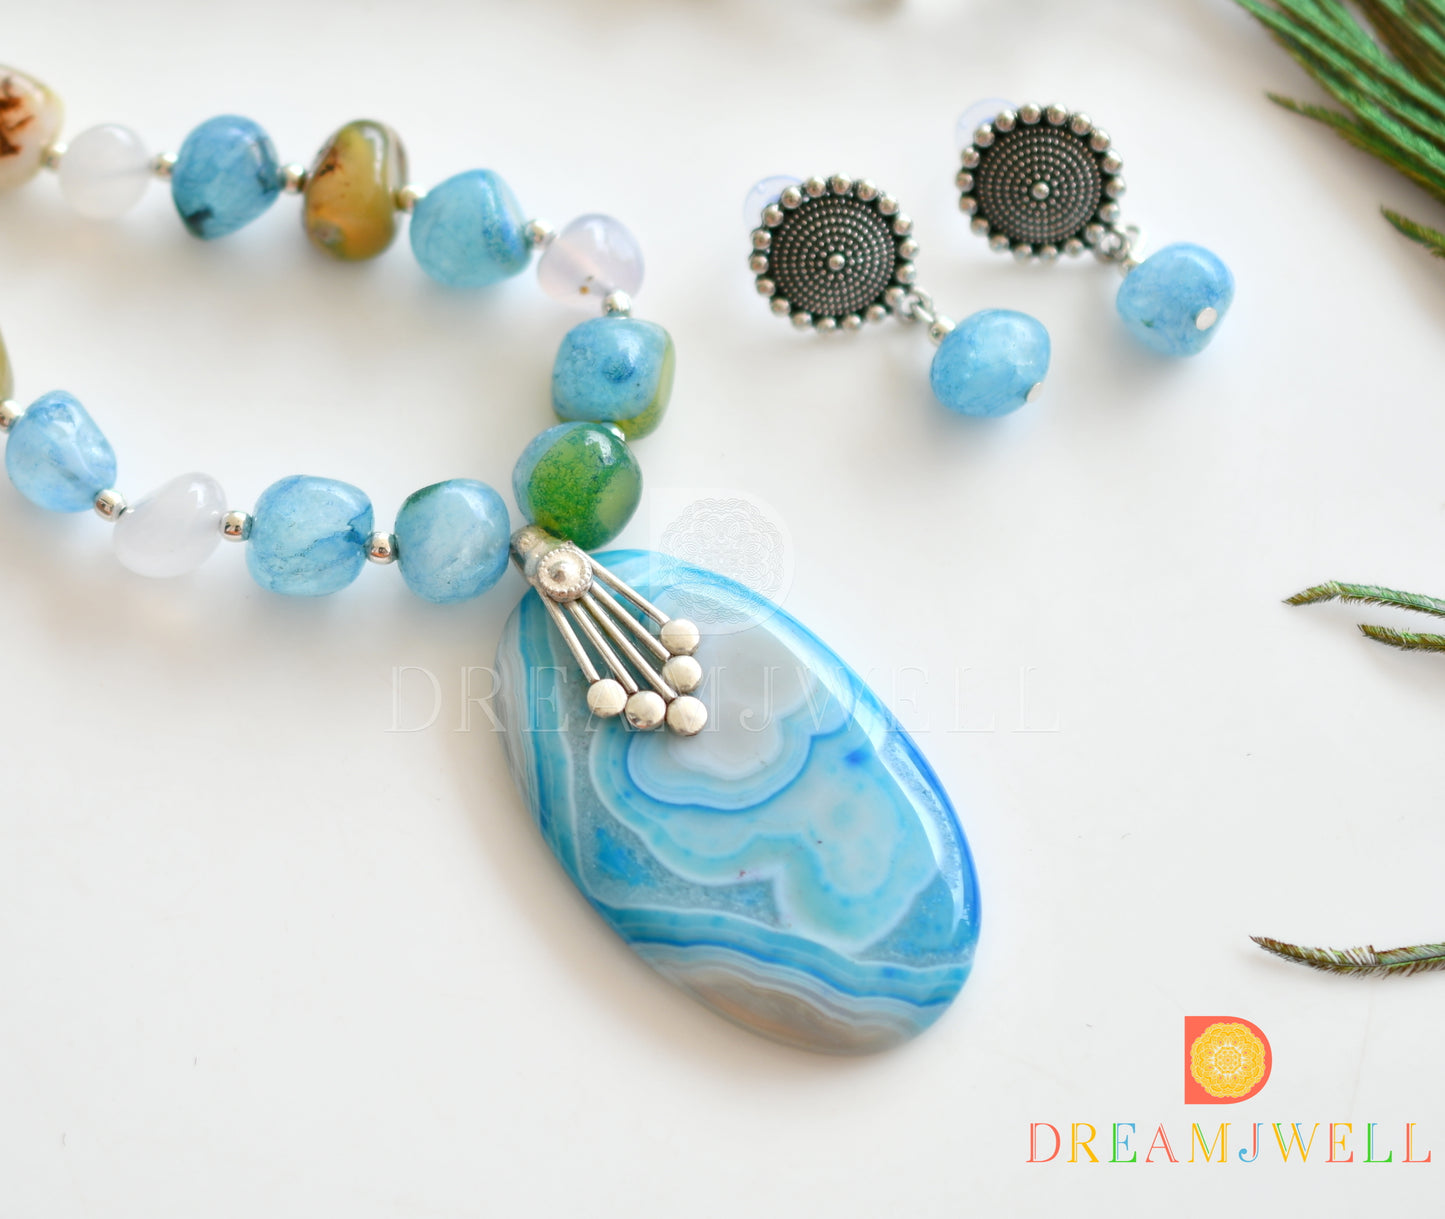 Silver tone sliced agate pendant with skyblue-green onyx beads necklace set dj-37170